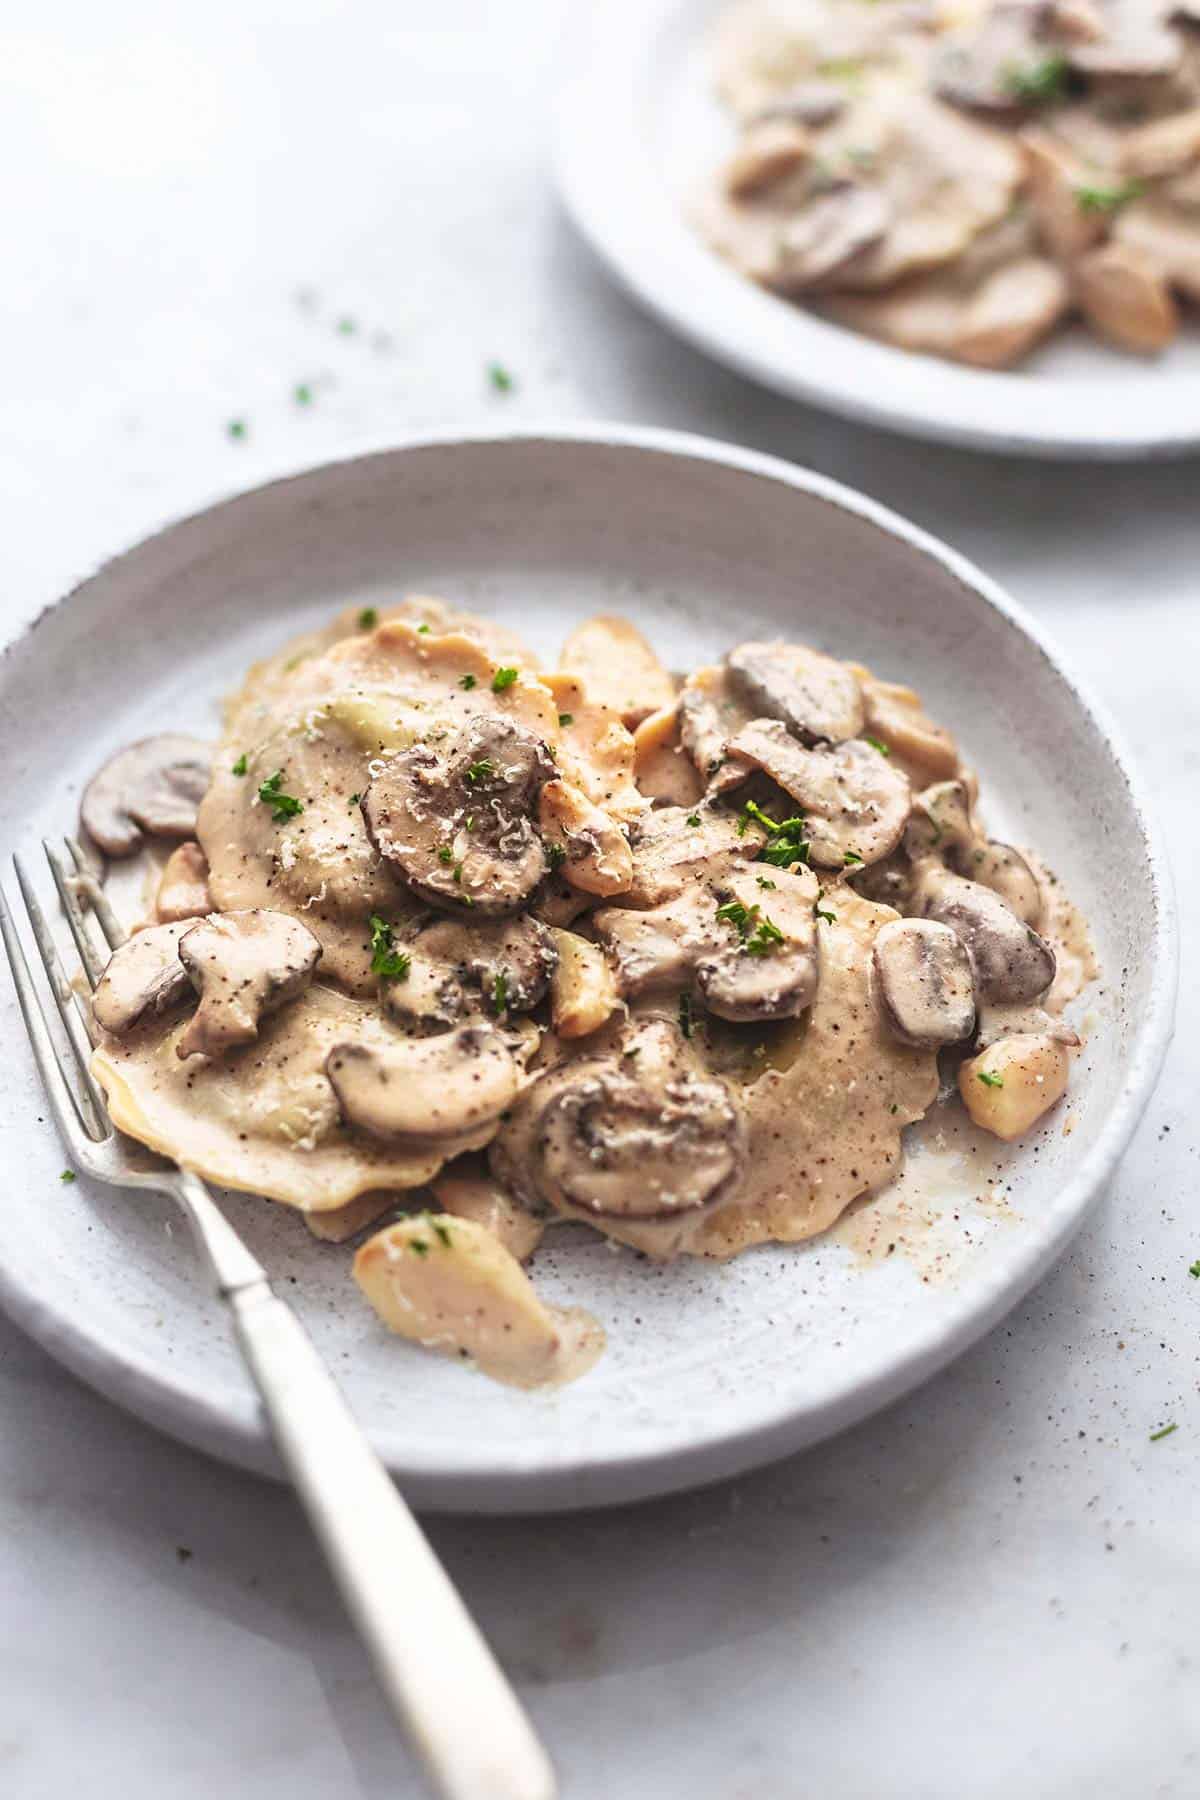 ravioli with mushrooms and garlic on a white plate with a fork